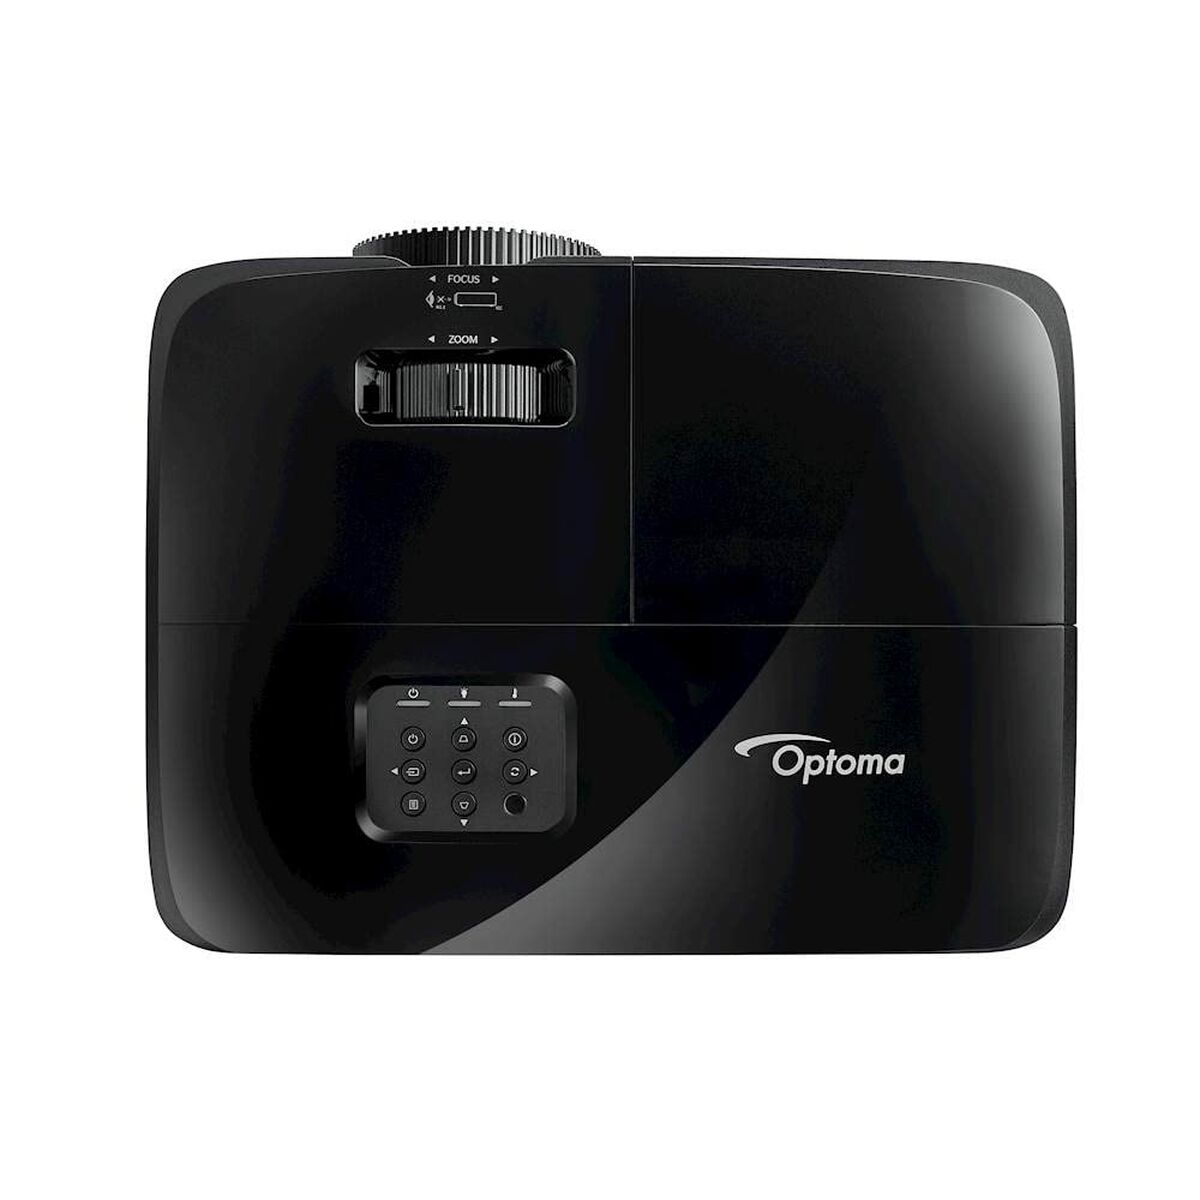 Projector Optoma X371 3800 lm XGA Black, Optoma, Electronics, TV, Video and home cinema, projector-optoma-x371-3800-lm-xga-black, Brand_Optoma, category-reference-2609, category-reference-2642, category-reference-2947, category-reference-t-18805, category-reference-t-18811, category-reference-t-19653, cinema and television, computers / peripherals, Condition_NEW, entertainment, office, Price_400 - 500, RiotNook